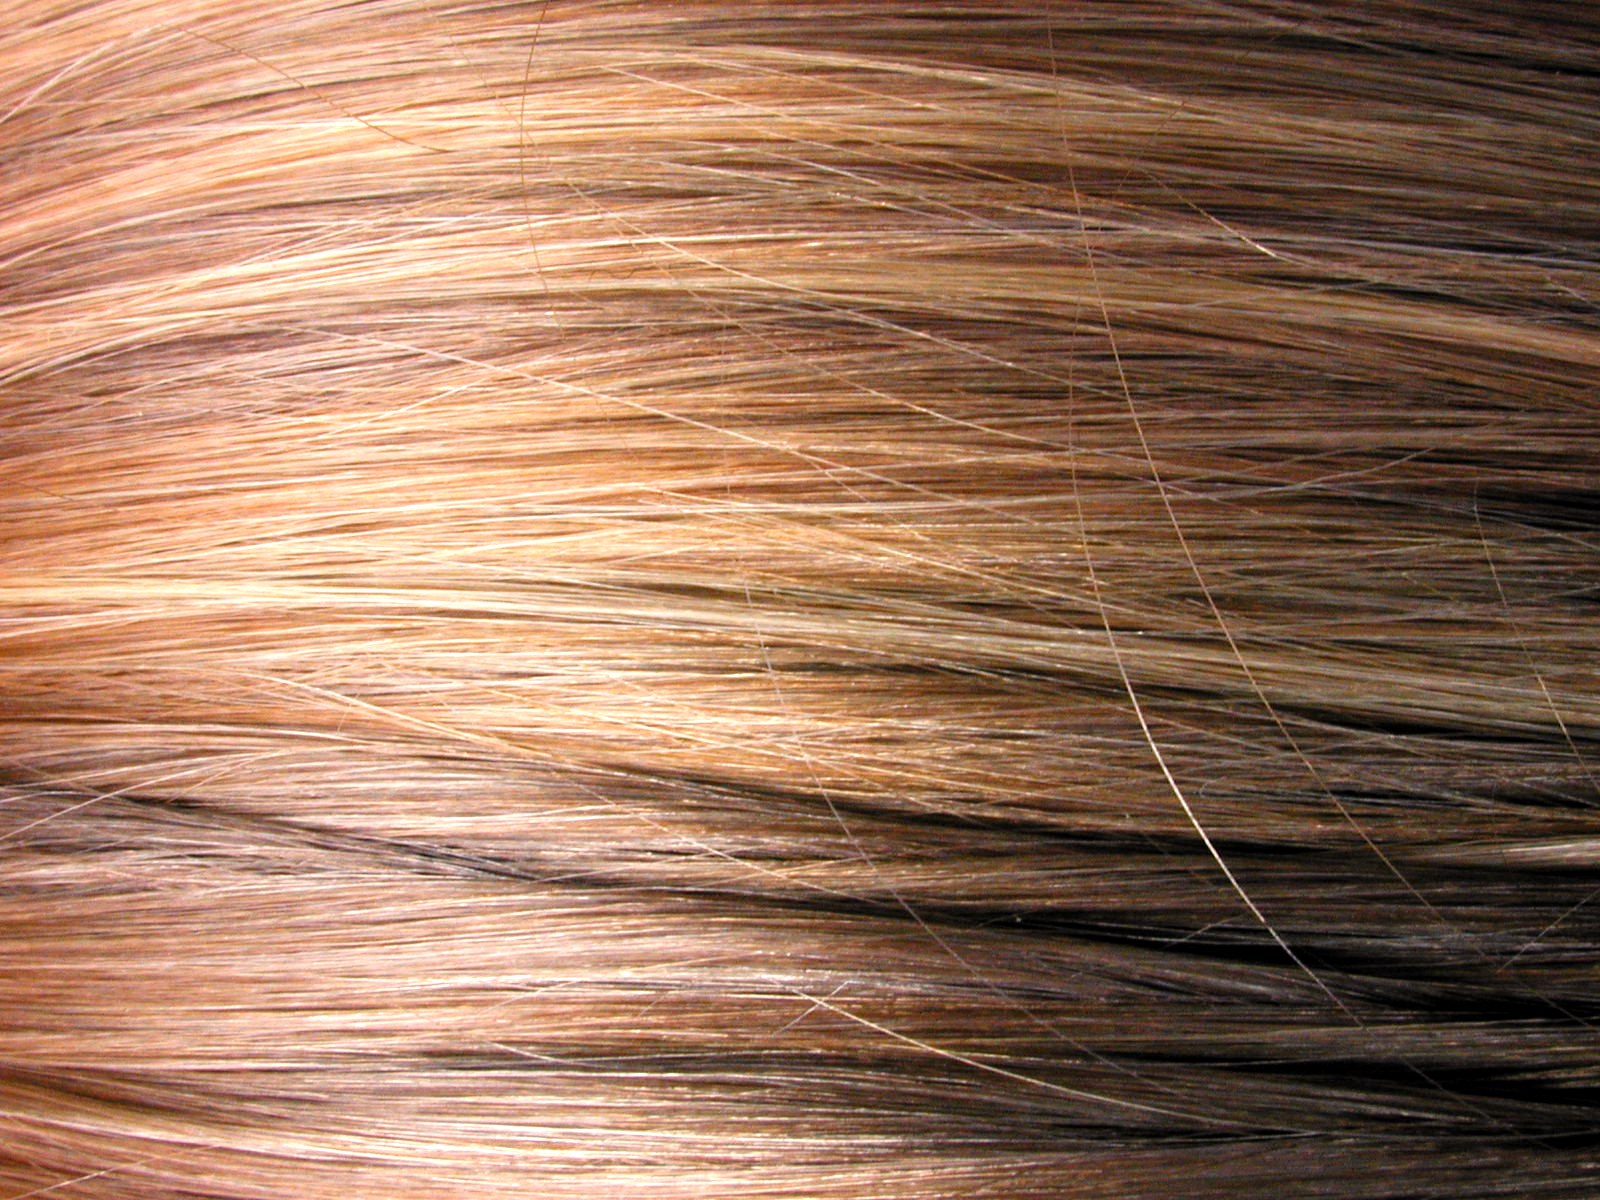 1. "MD Blonde Hair Texture" by Madison Reed - wide 9